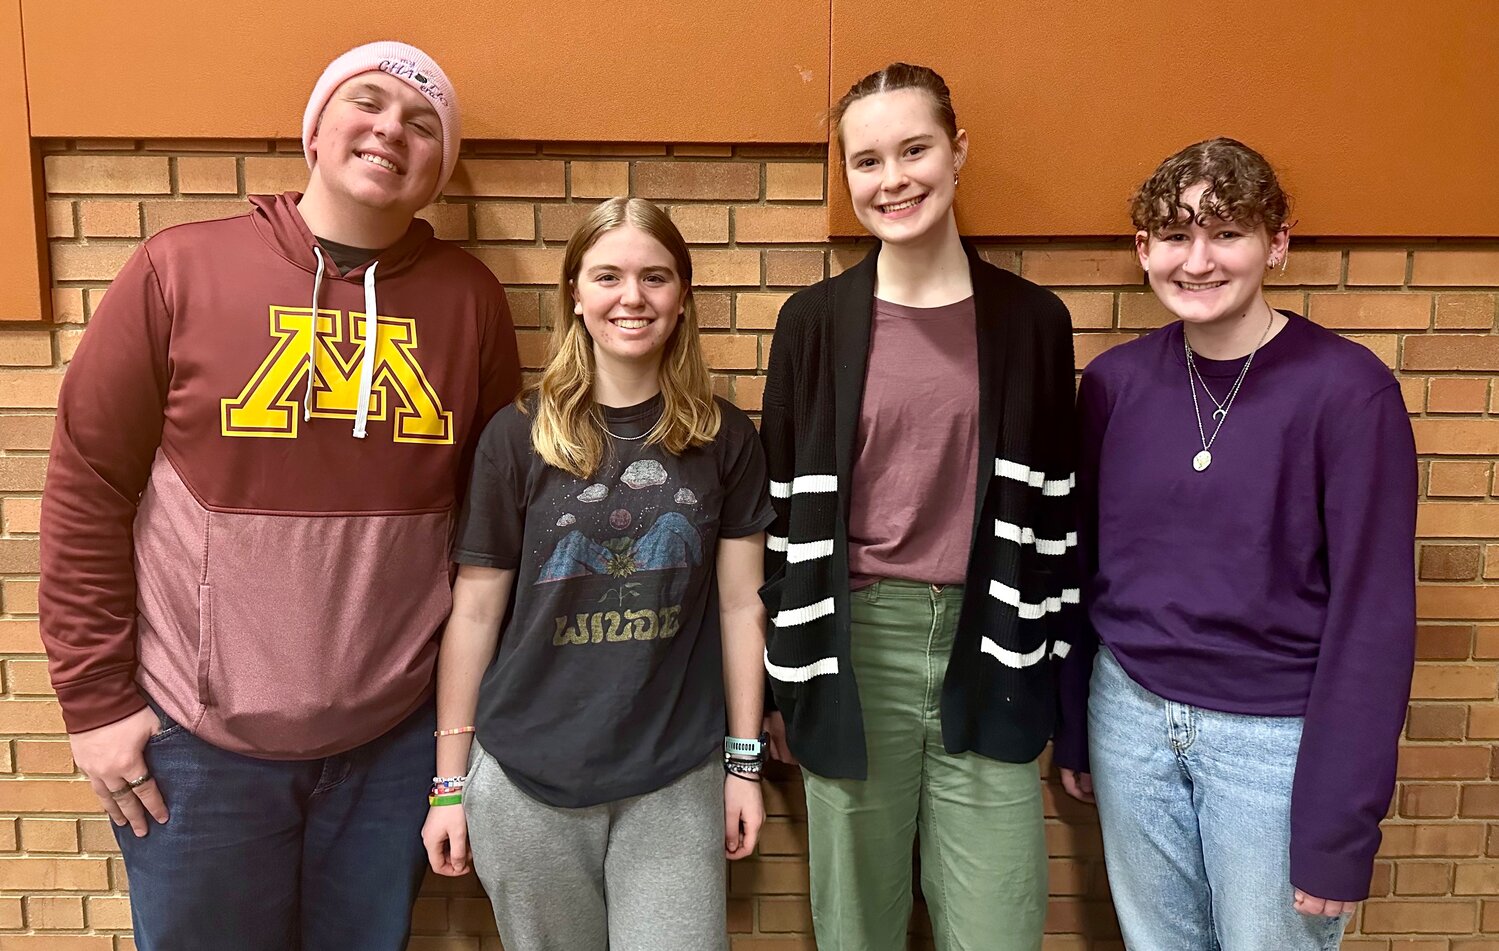 Tom Mickelson (coach), Ani McQuillen (state tournament competitor), Eleanor Nervig (state tournament competitor), and Adler Young (Roosevelt debater who attended to support and help prepare Ani and Eleanor for their debates). (Photo submitted)